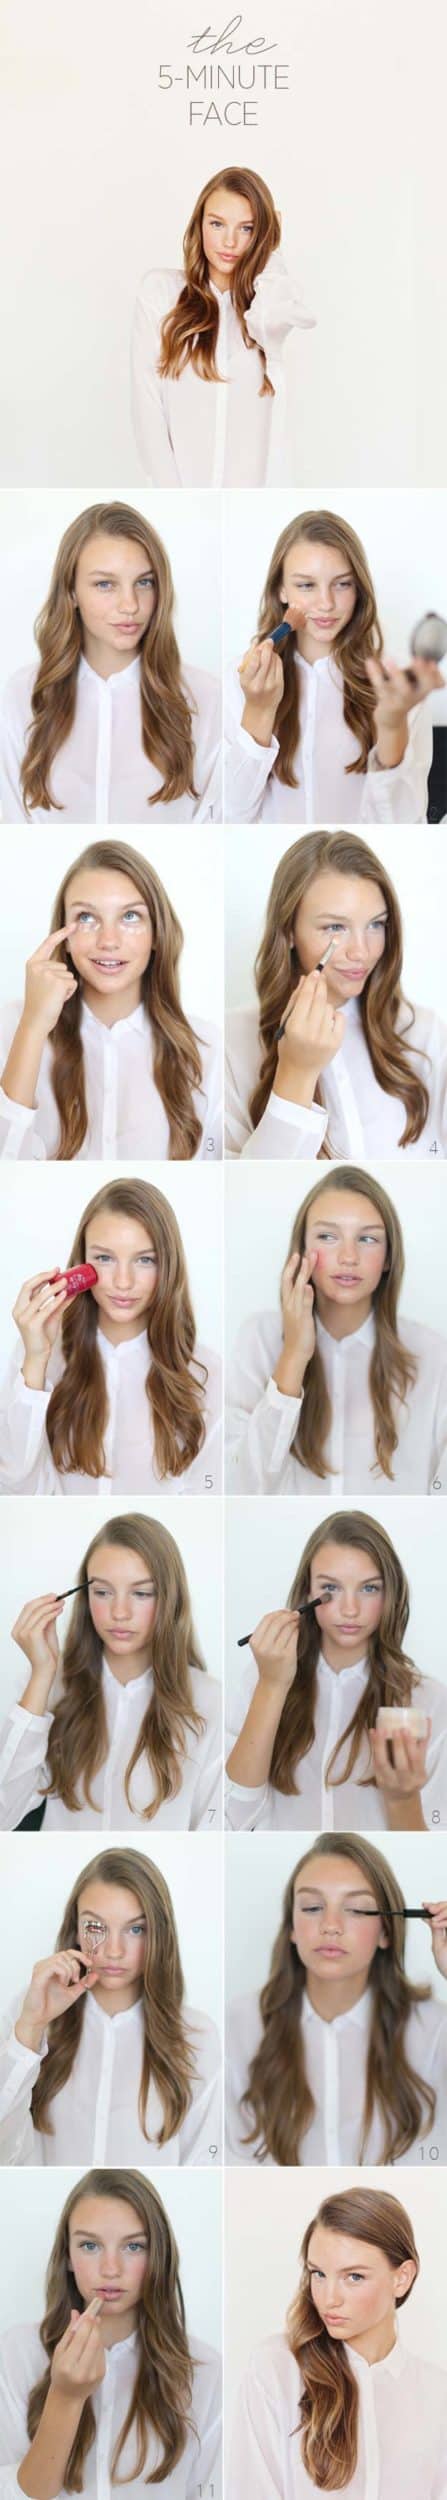 Sweet Teen Makeup Ideas That Every Girl Should Check Out